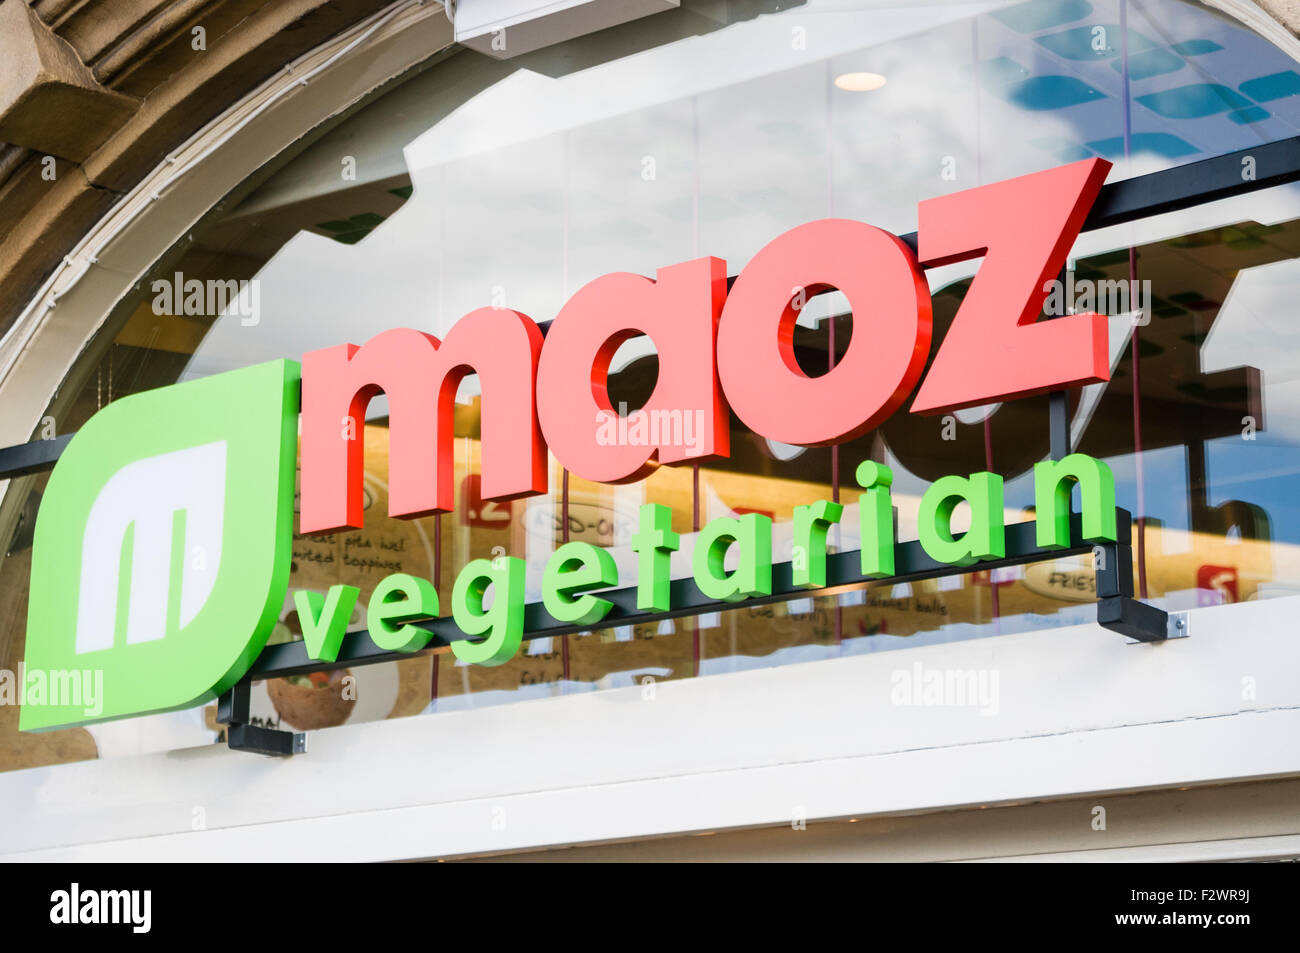 Sign for a Maoz vegetarian take-away chain in Amsterdam Stock Photo